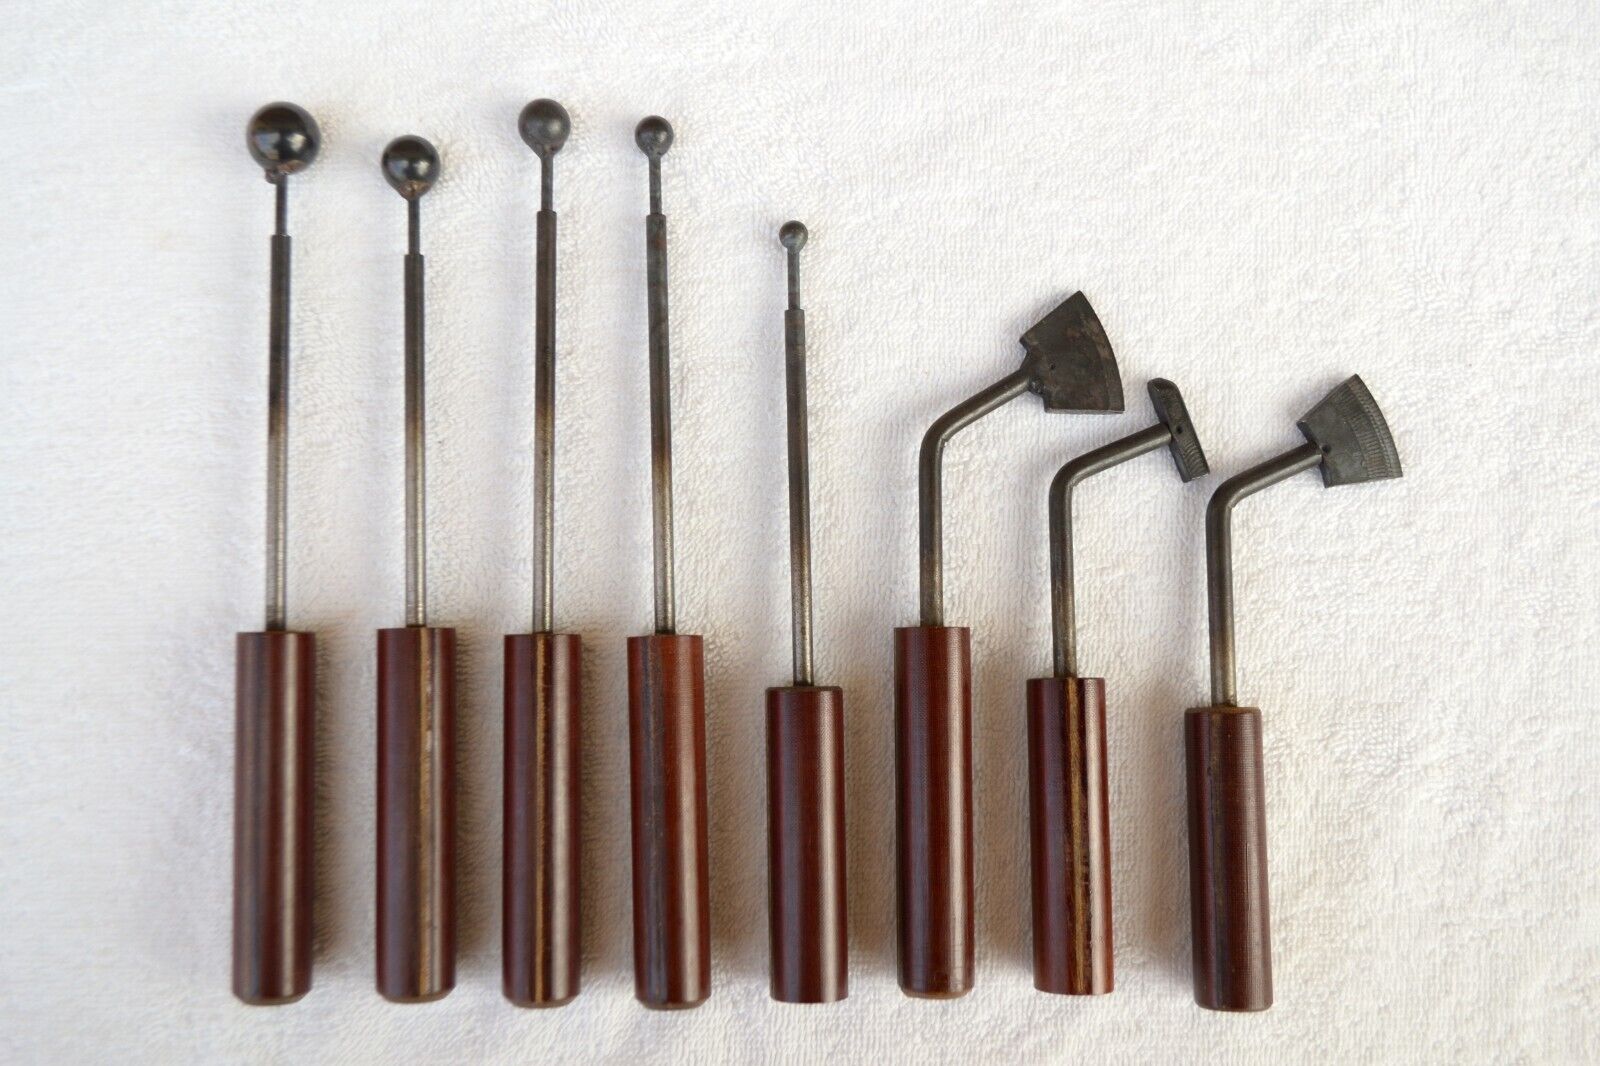 Vintage Flowers Making Tools Set Of 8 For Milinery With Ebonite Handles